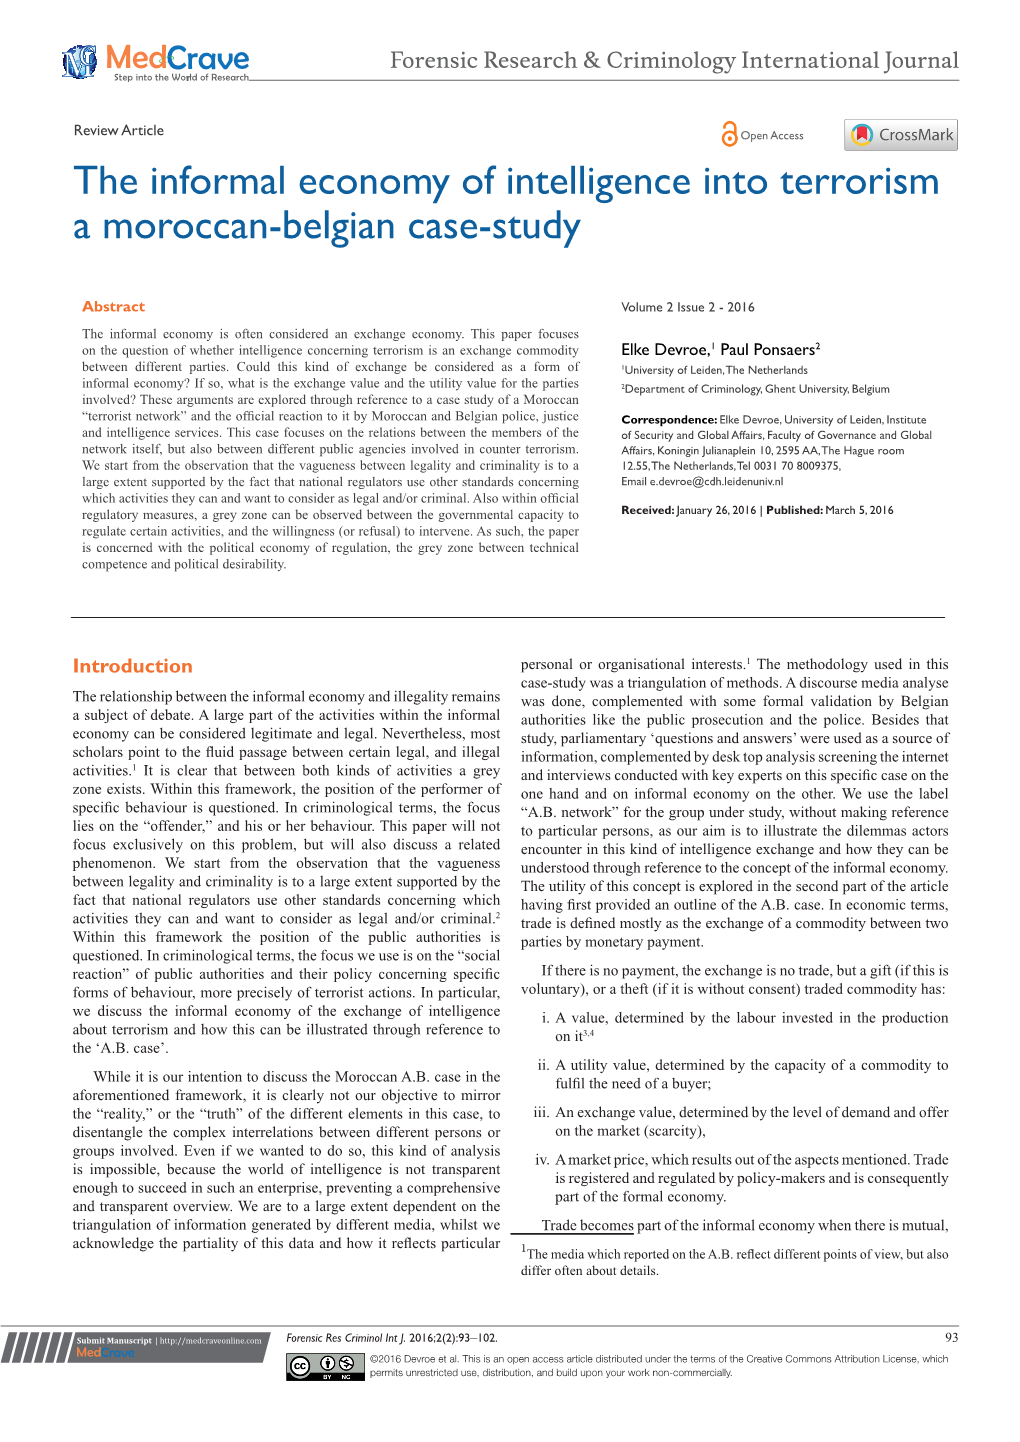 The Informal Economy of Intelligence Into Terrorism a Moroccan-Belgian Case-Study